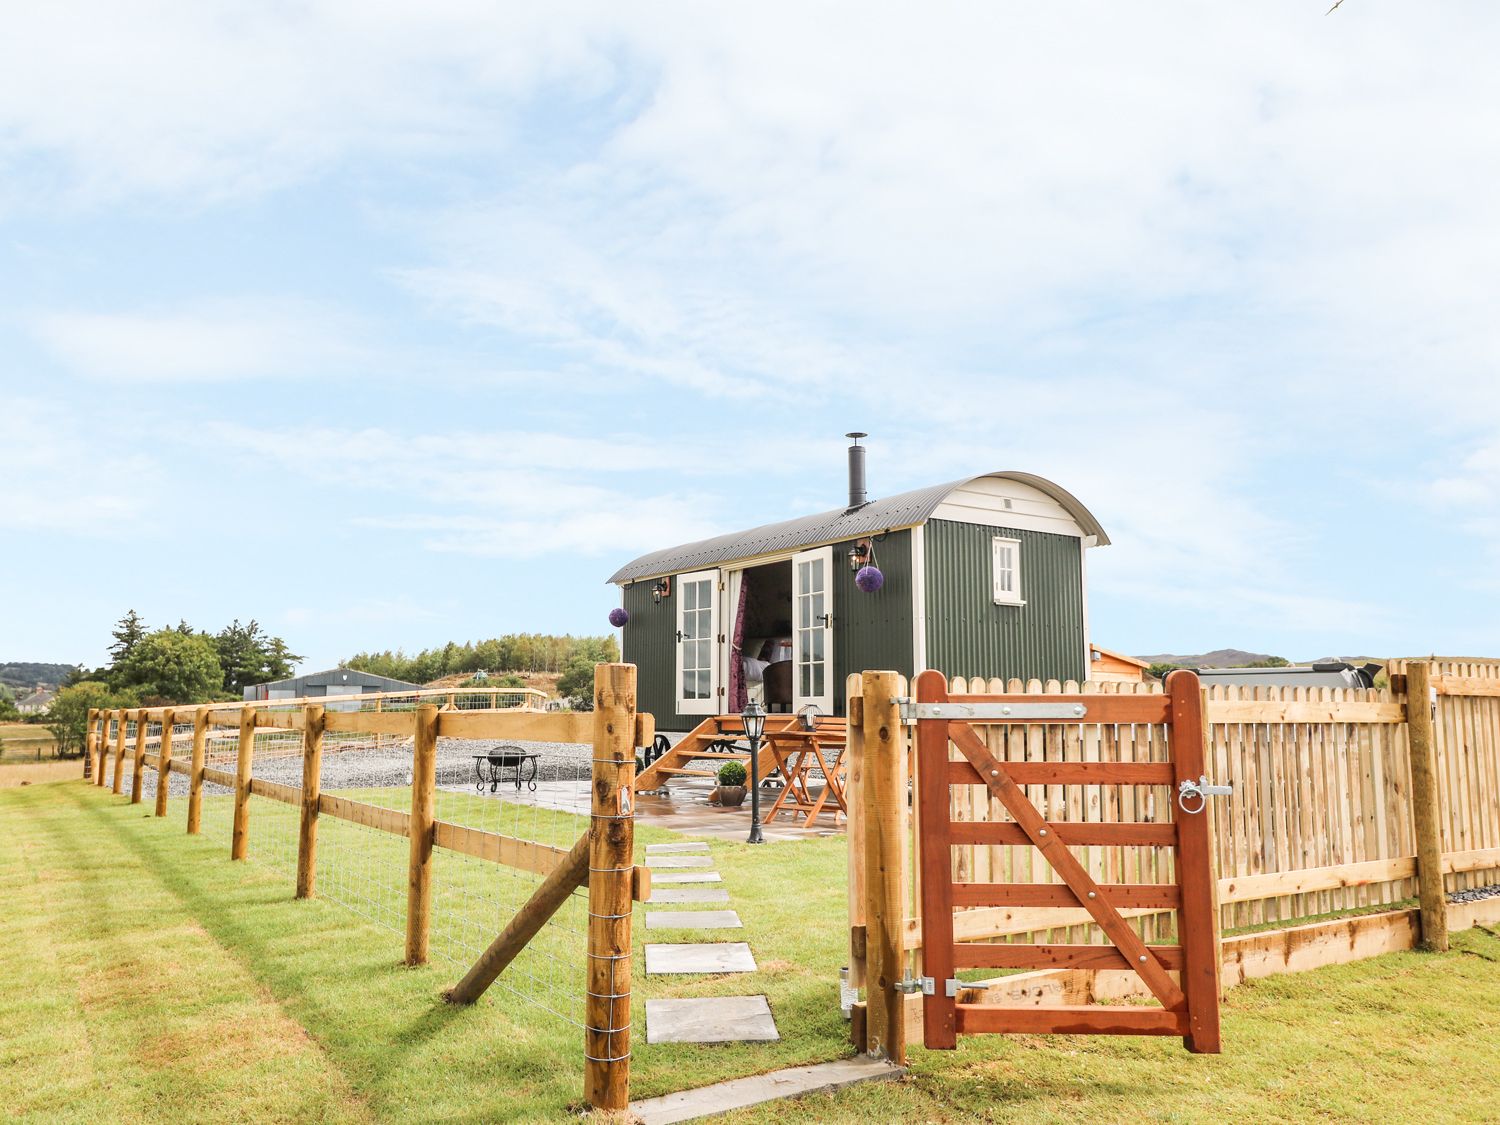 Glamping in Wales on a Working Farm